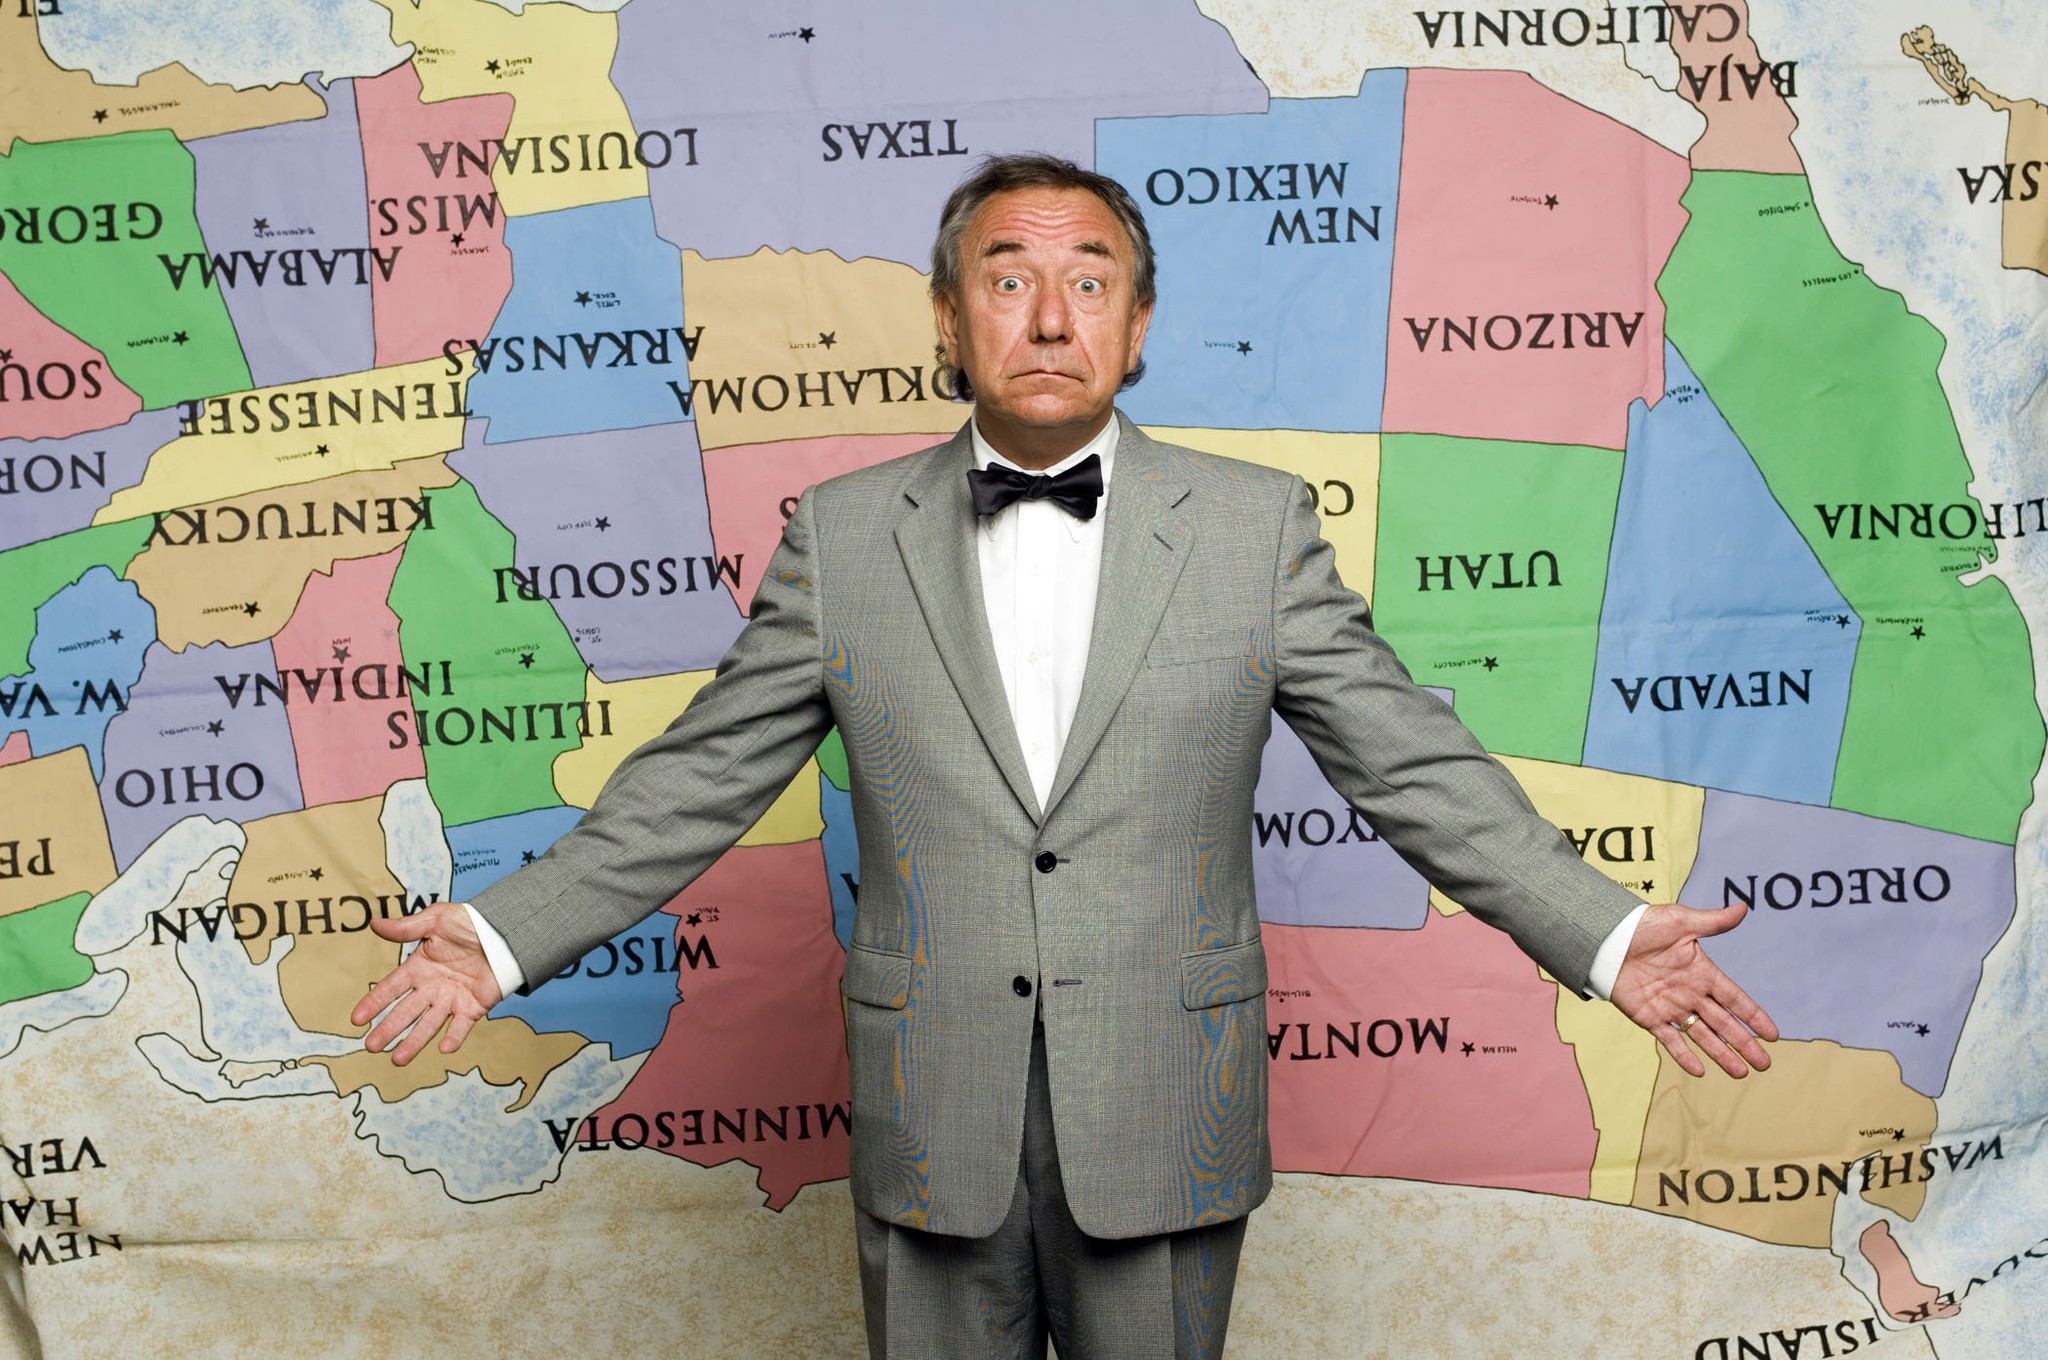 Will Durst’s Elect To Laugh stand-up comedy show is coming to Bellevue Oct. 12. Contributed photo